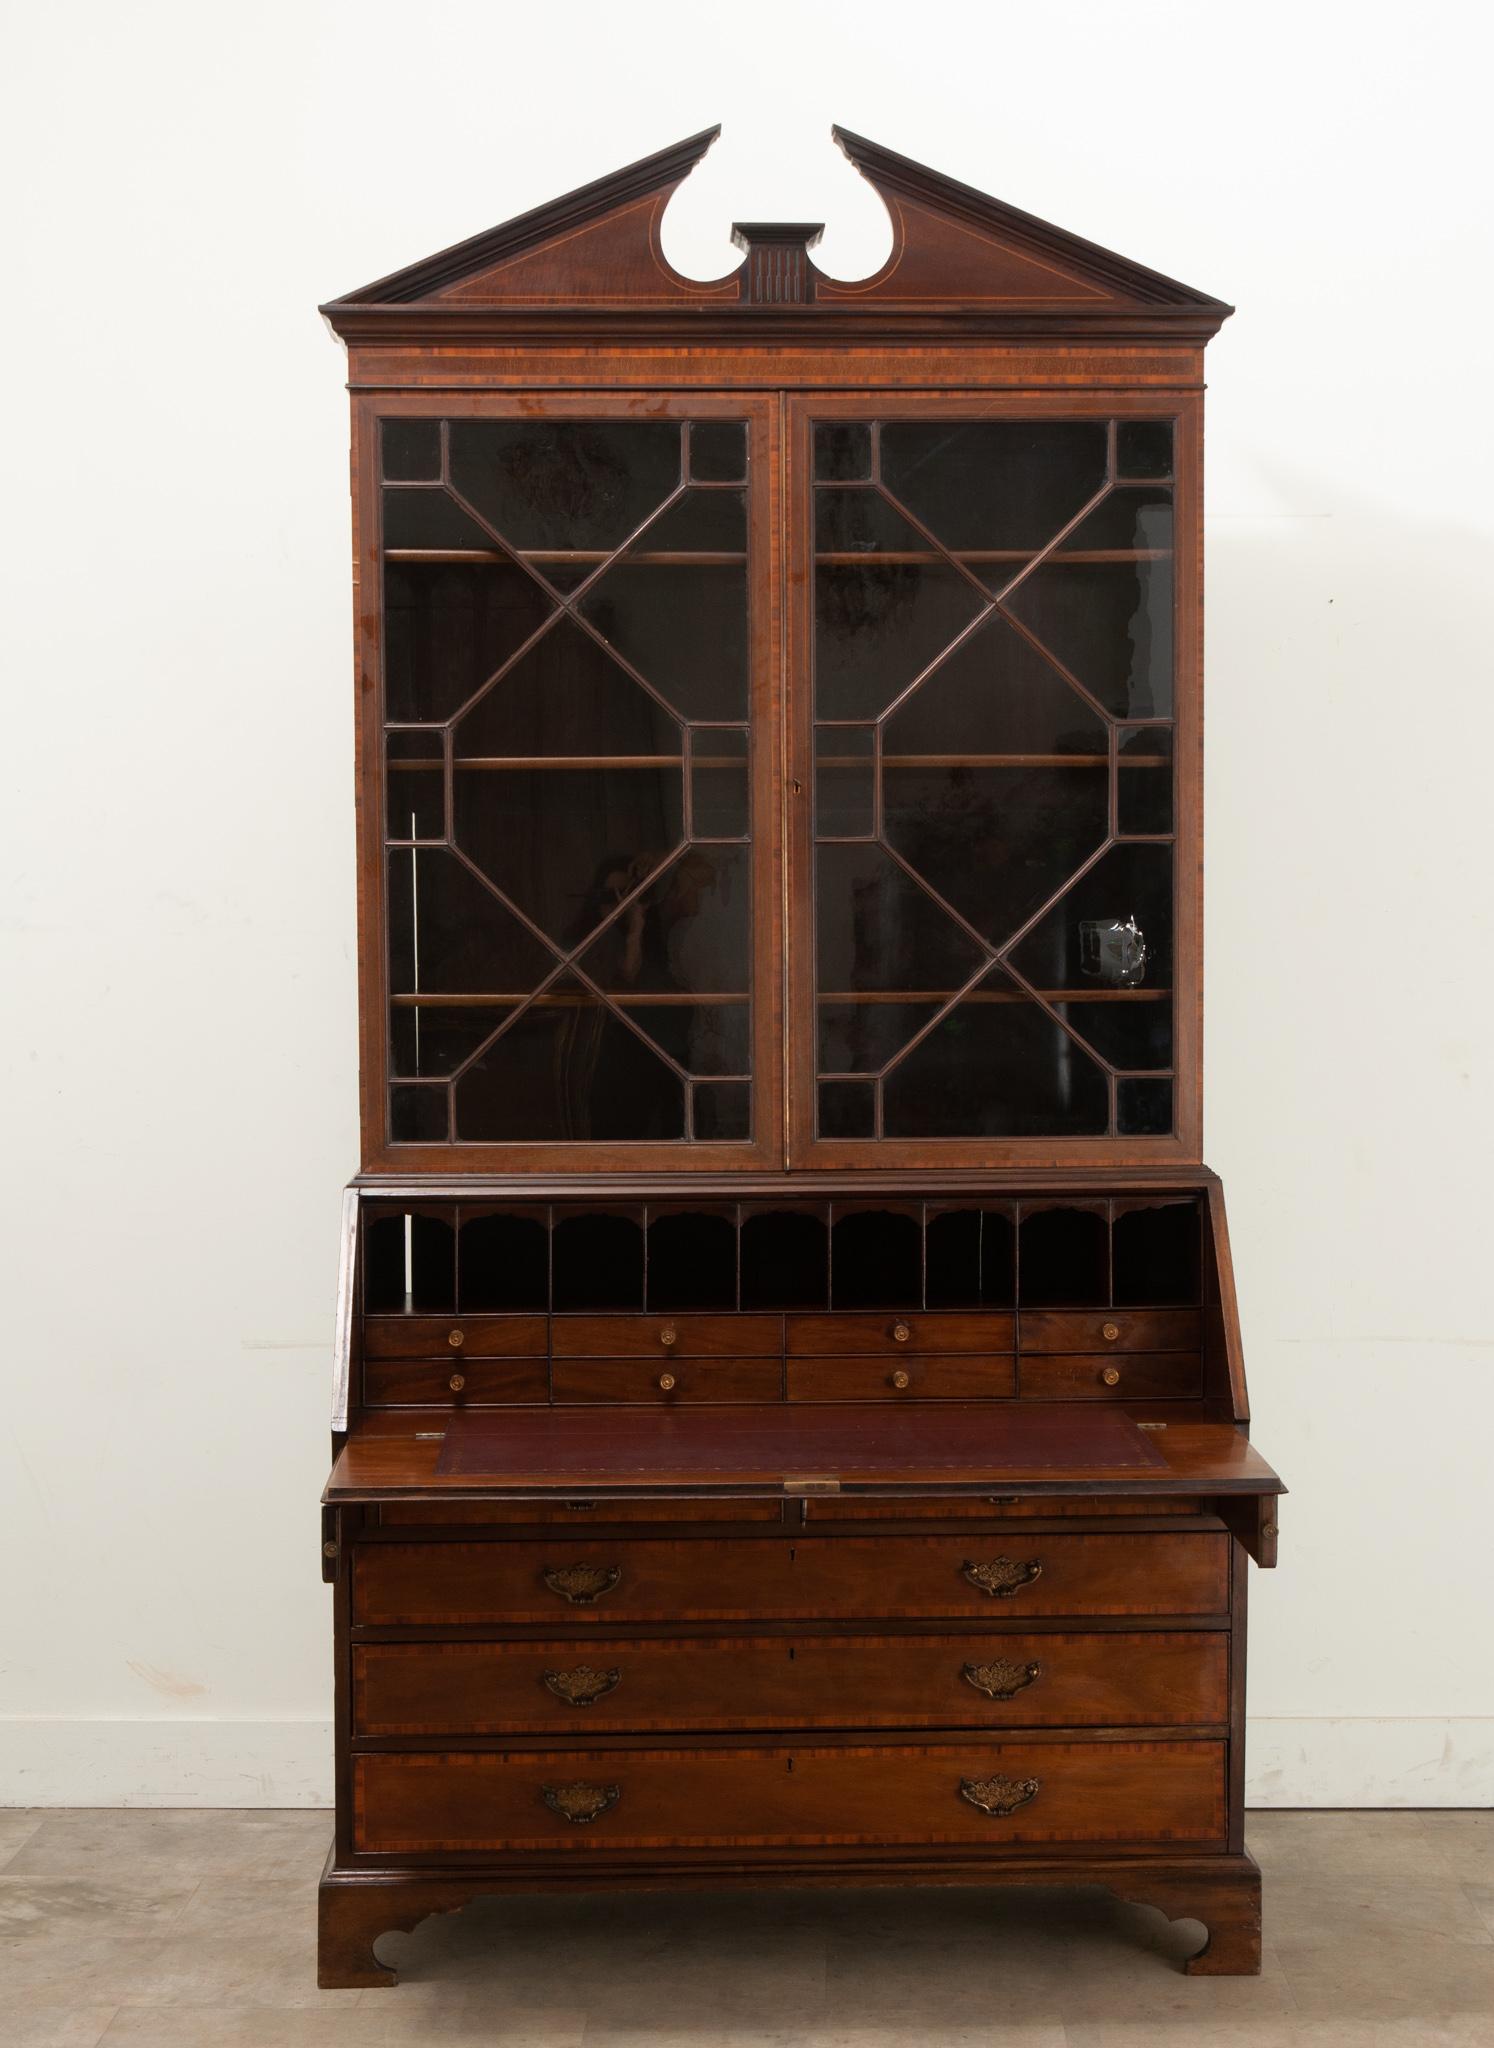 A mahogany secrétaire made in England circa 1890. This secrétaire is topped with a broken pediment design over a pair of glass front doors that open with a working lock and key. Inside are three adjustable shelves at 8” deep. A drop front desk opens